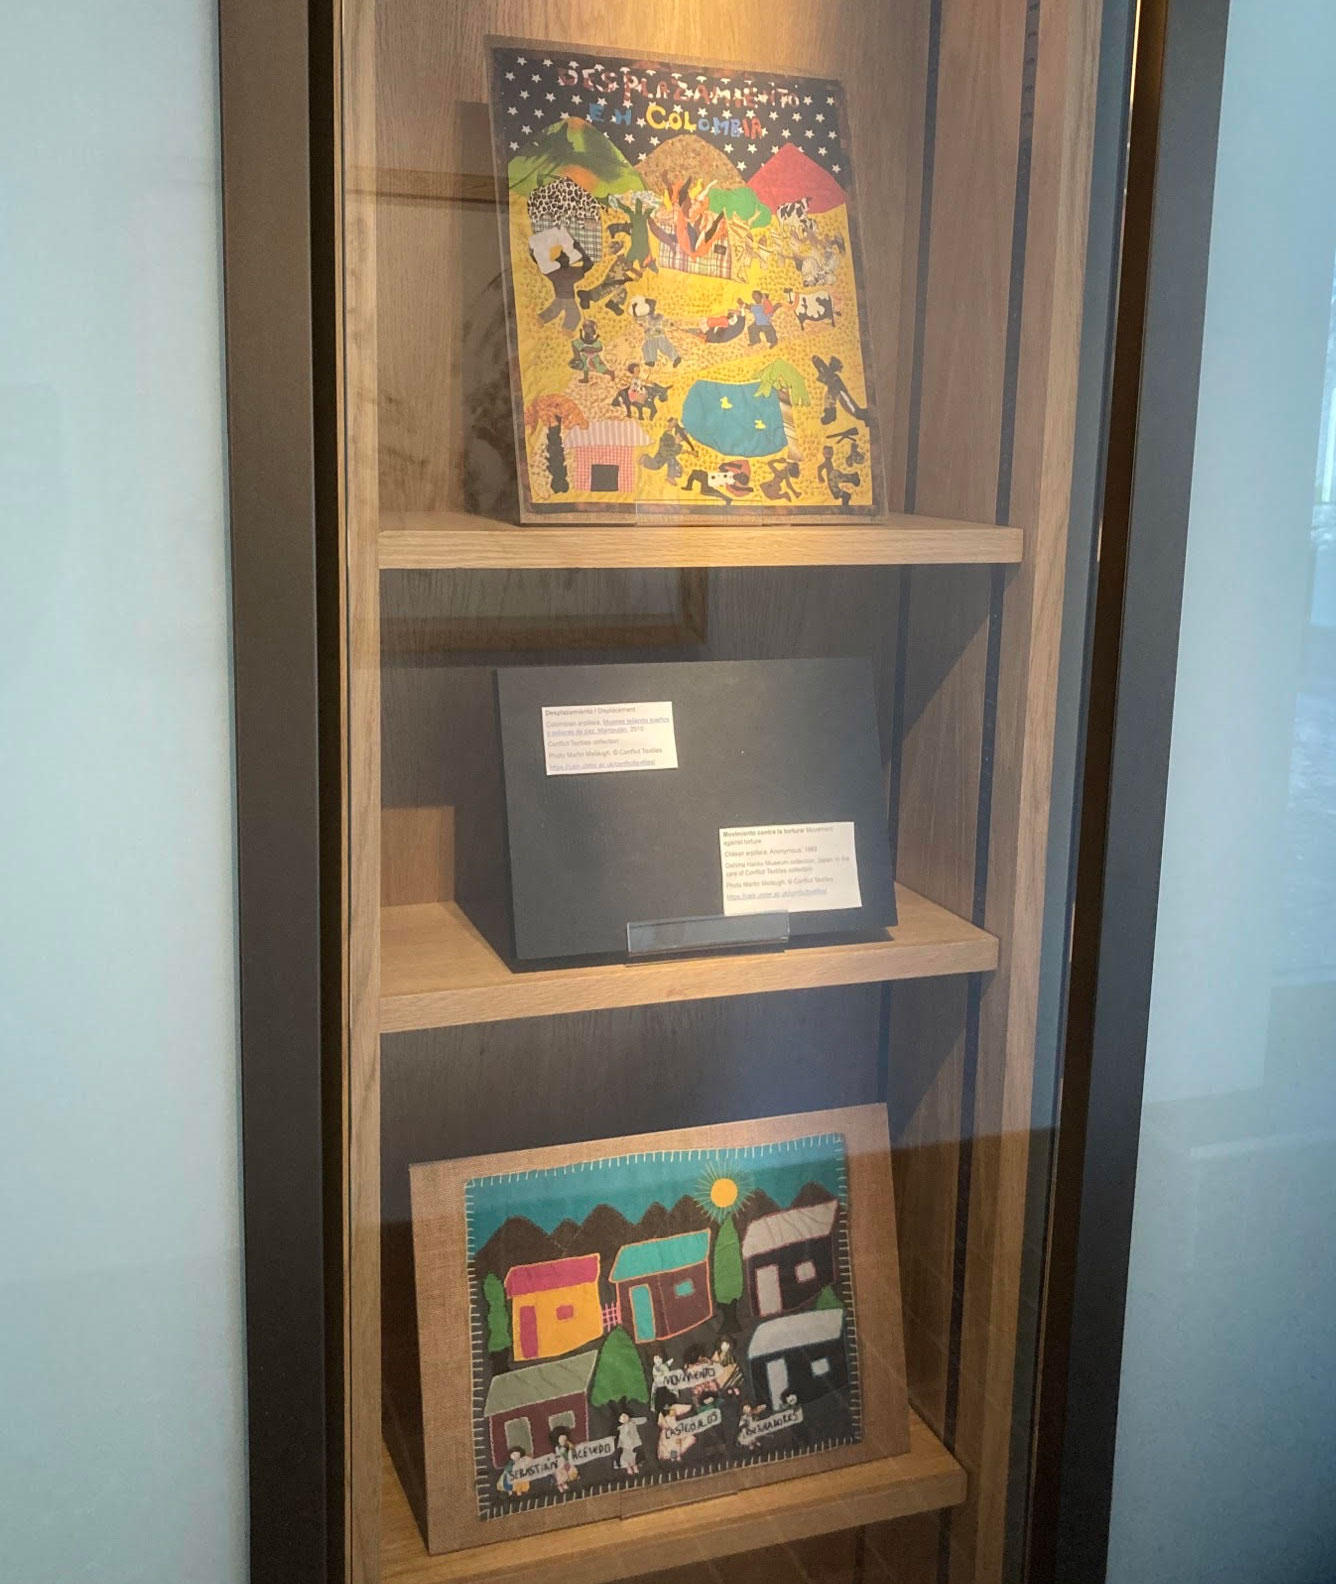 Images of two textiles 'Desplazamiento / Displacement' and 'Movimiento contra la tortura / Movement against torture', displayed in book cabinets at Wolfson College for the duration of the Oxford Human Rights Festival.  (Photo: Nicholas Marquez-Grant)